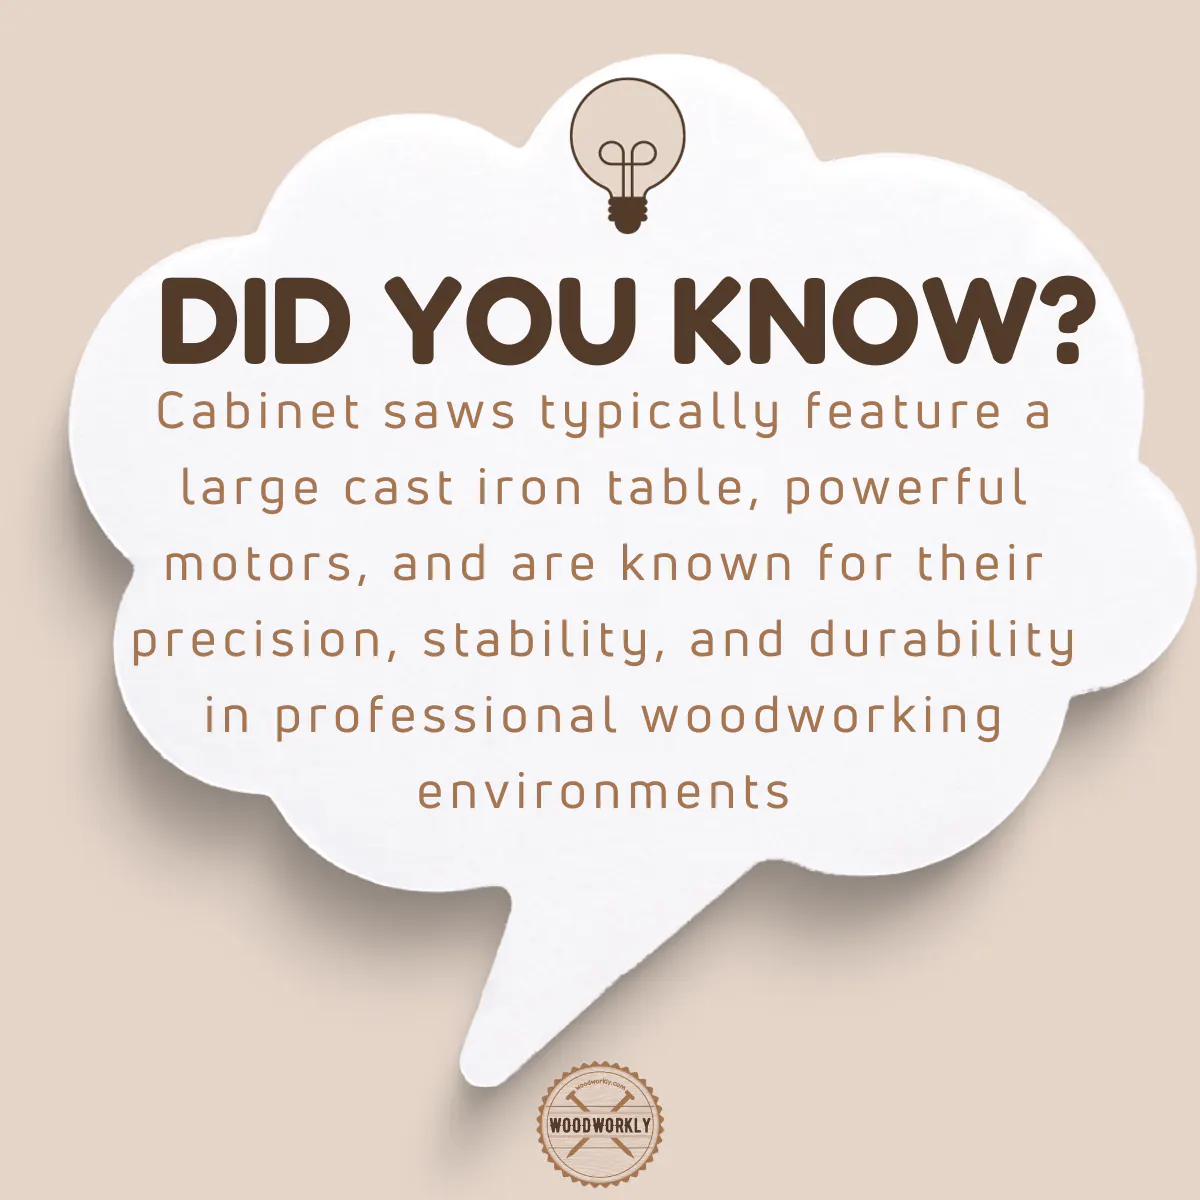 Did you know fact about Cabinet Saw